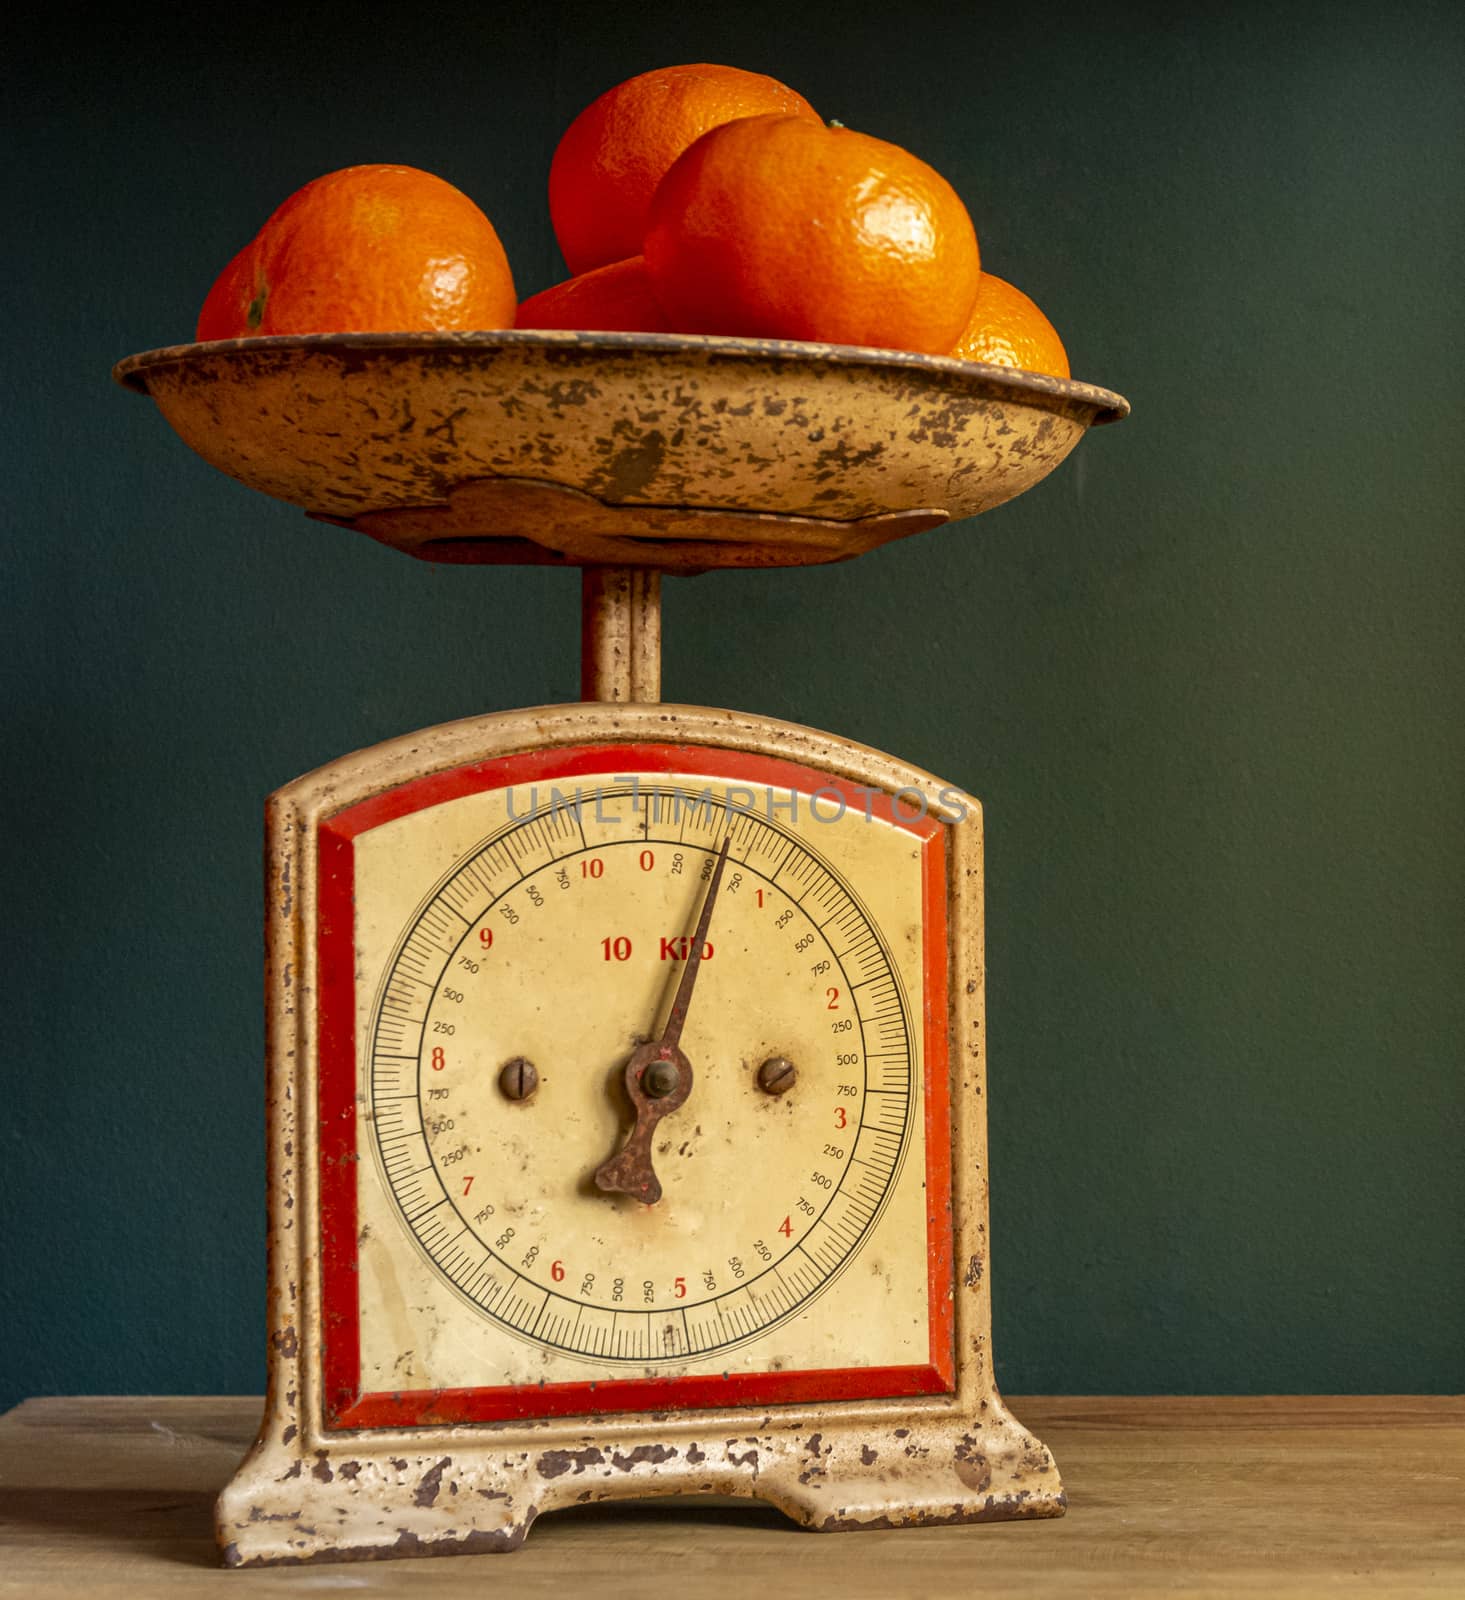 Weighing tangerines in a retro, vintage and worn out scale or balance, on a wooden plank against a guatemala green wall. by kb79